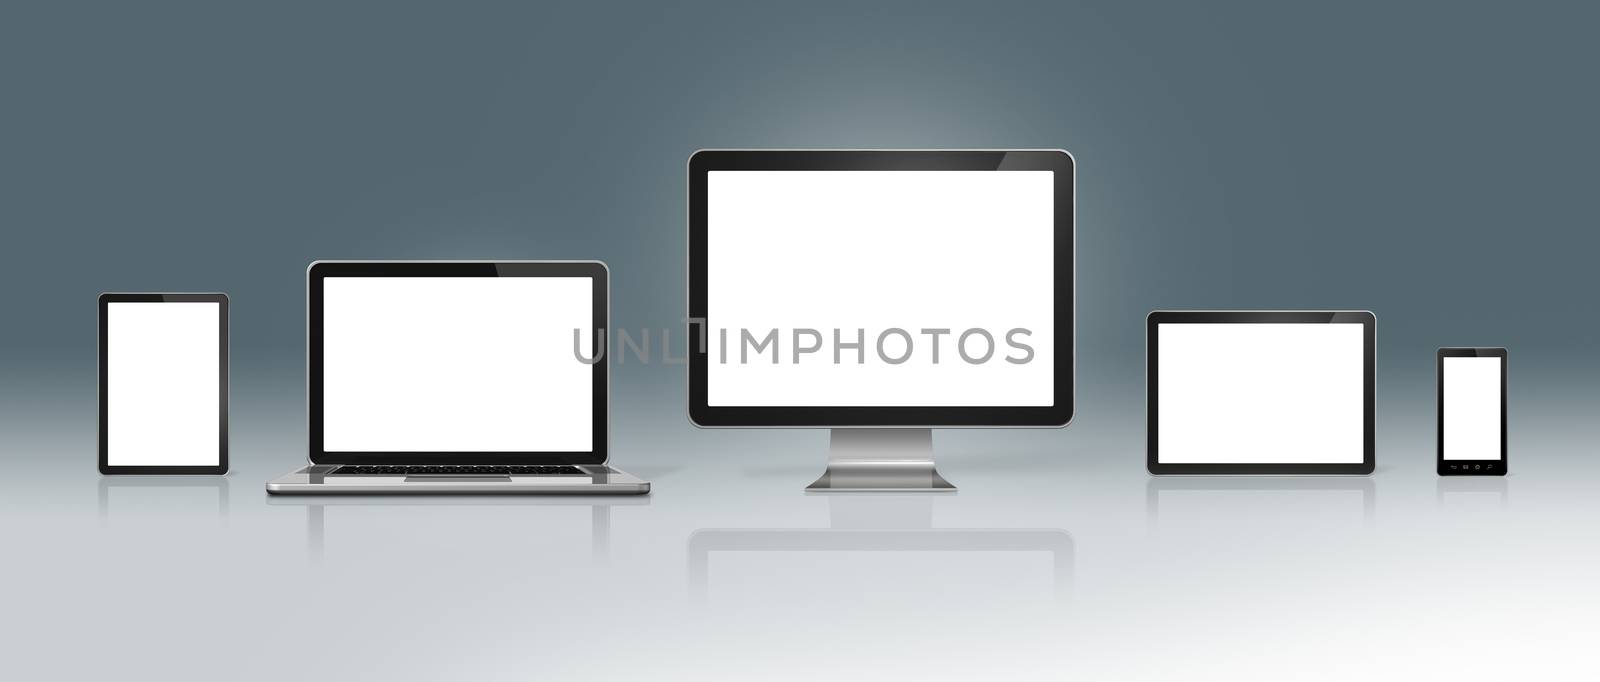 High Tech Computer Set on a deep grey background - isolated with clipping path